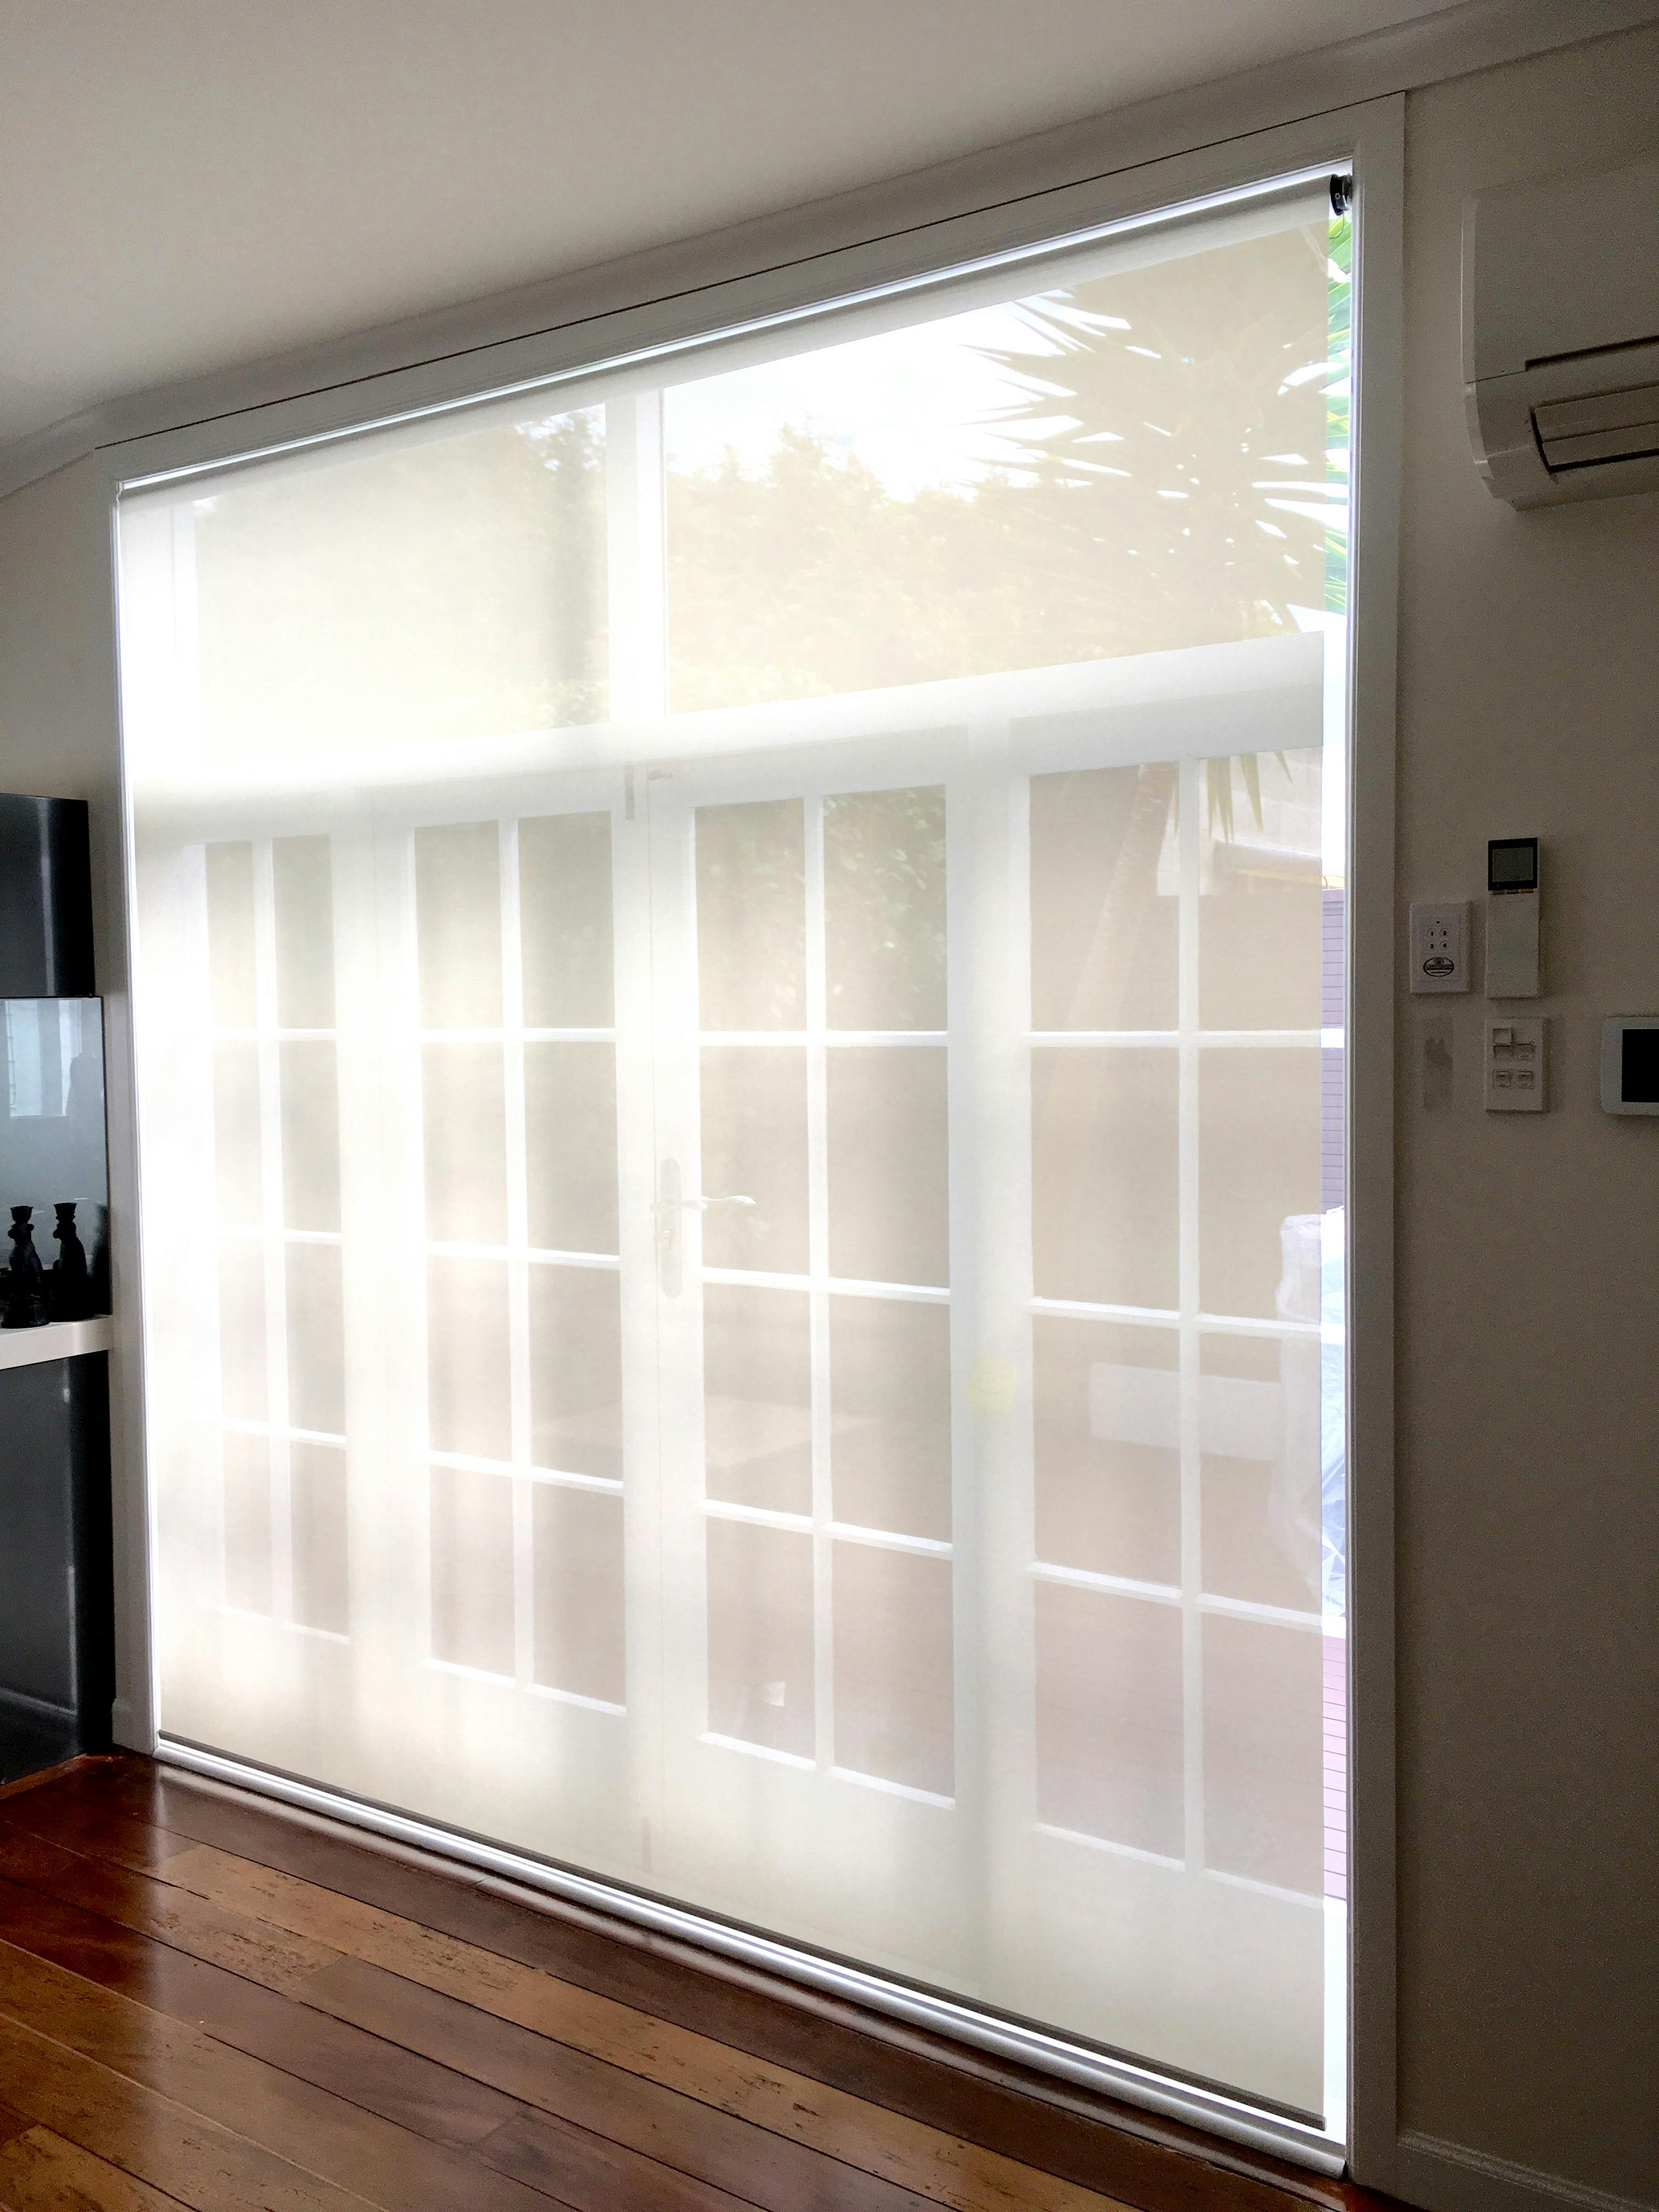 Roller blinds over french doors nz